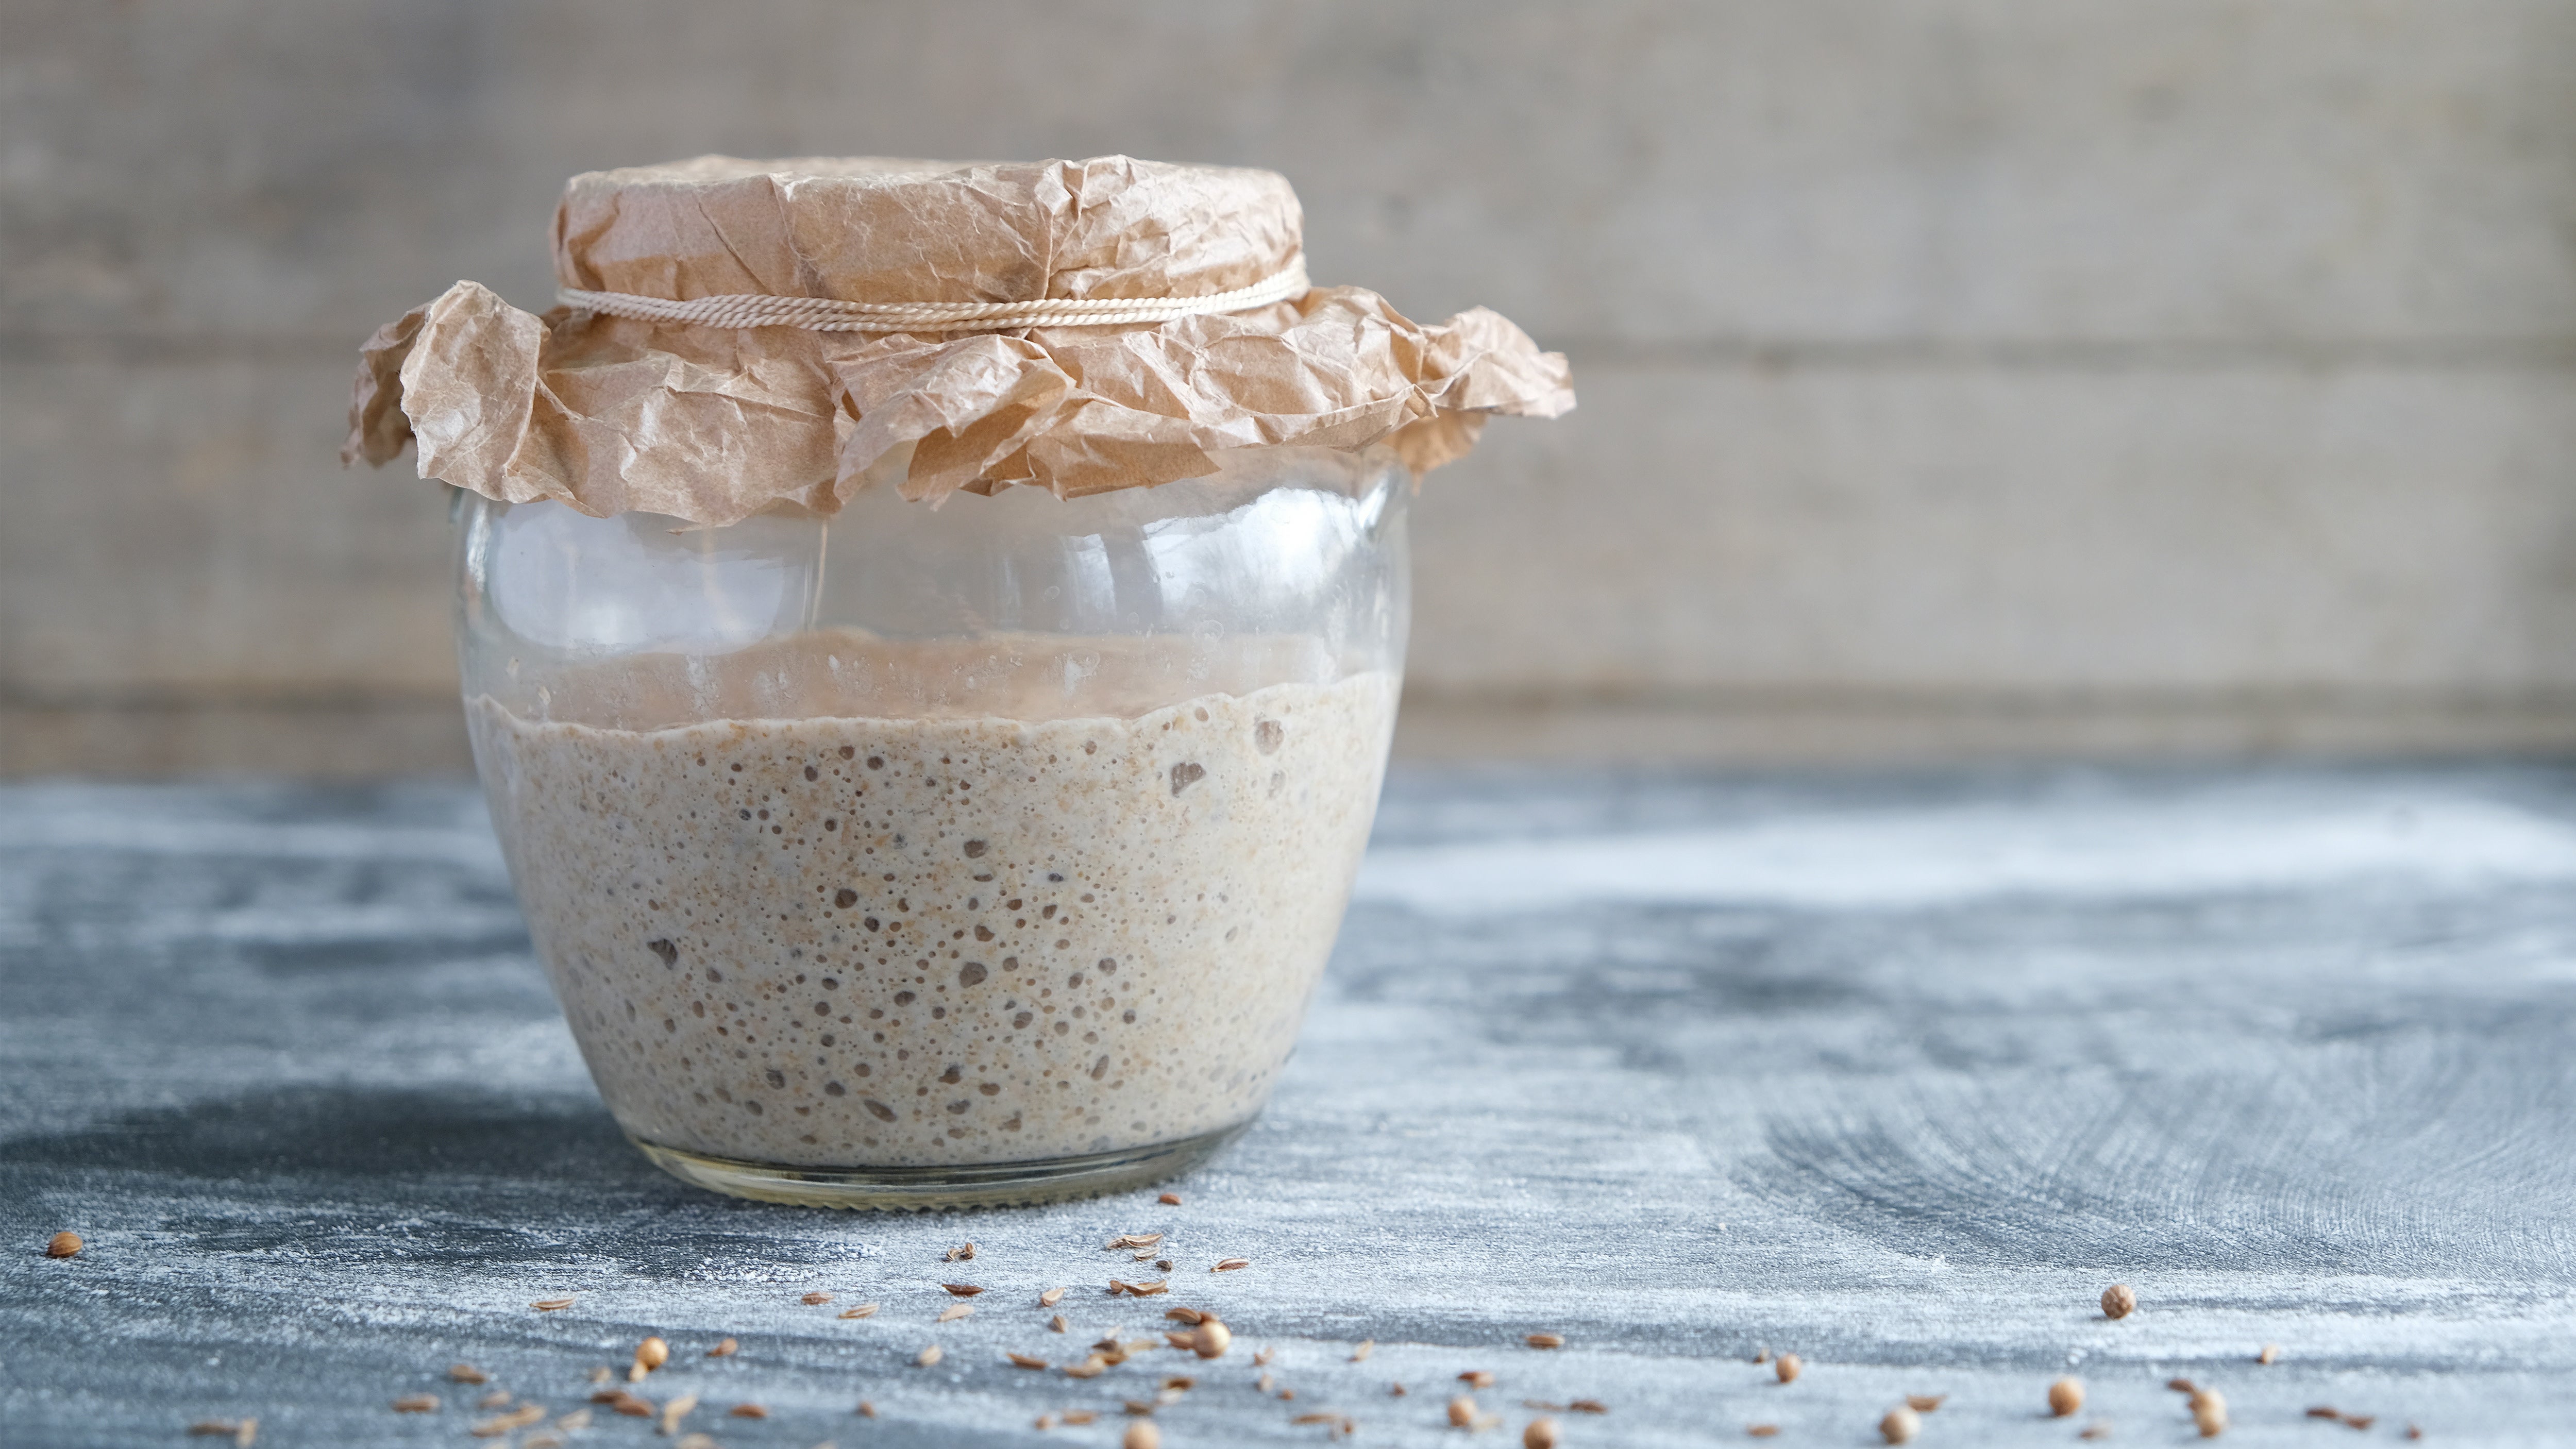 Scientists Want To Know About Your Sourdough Starter